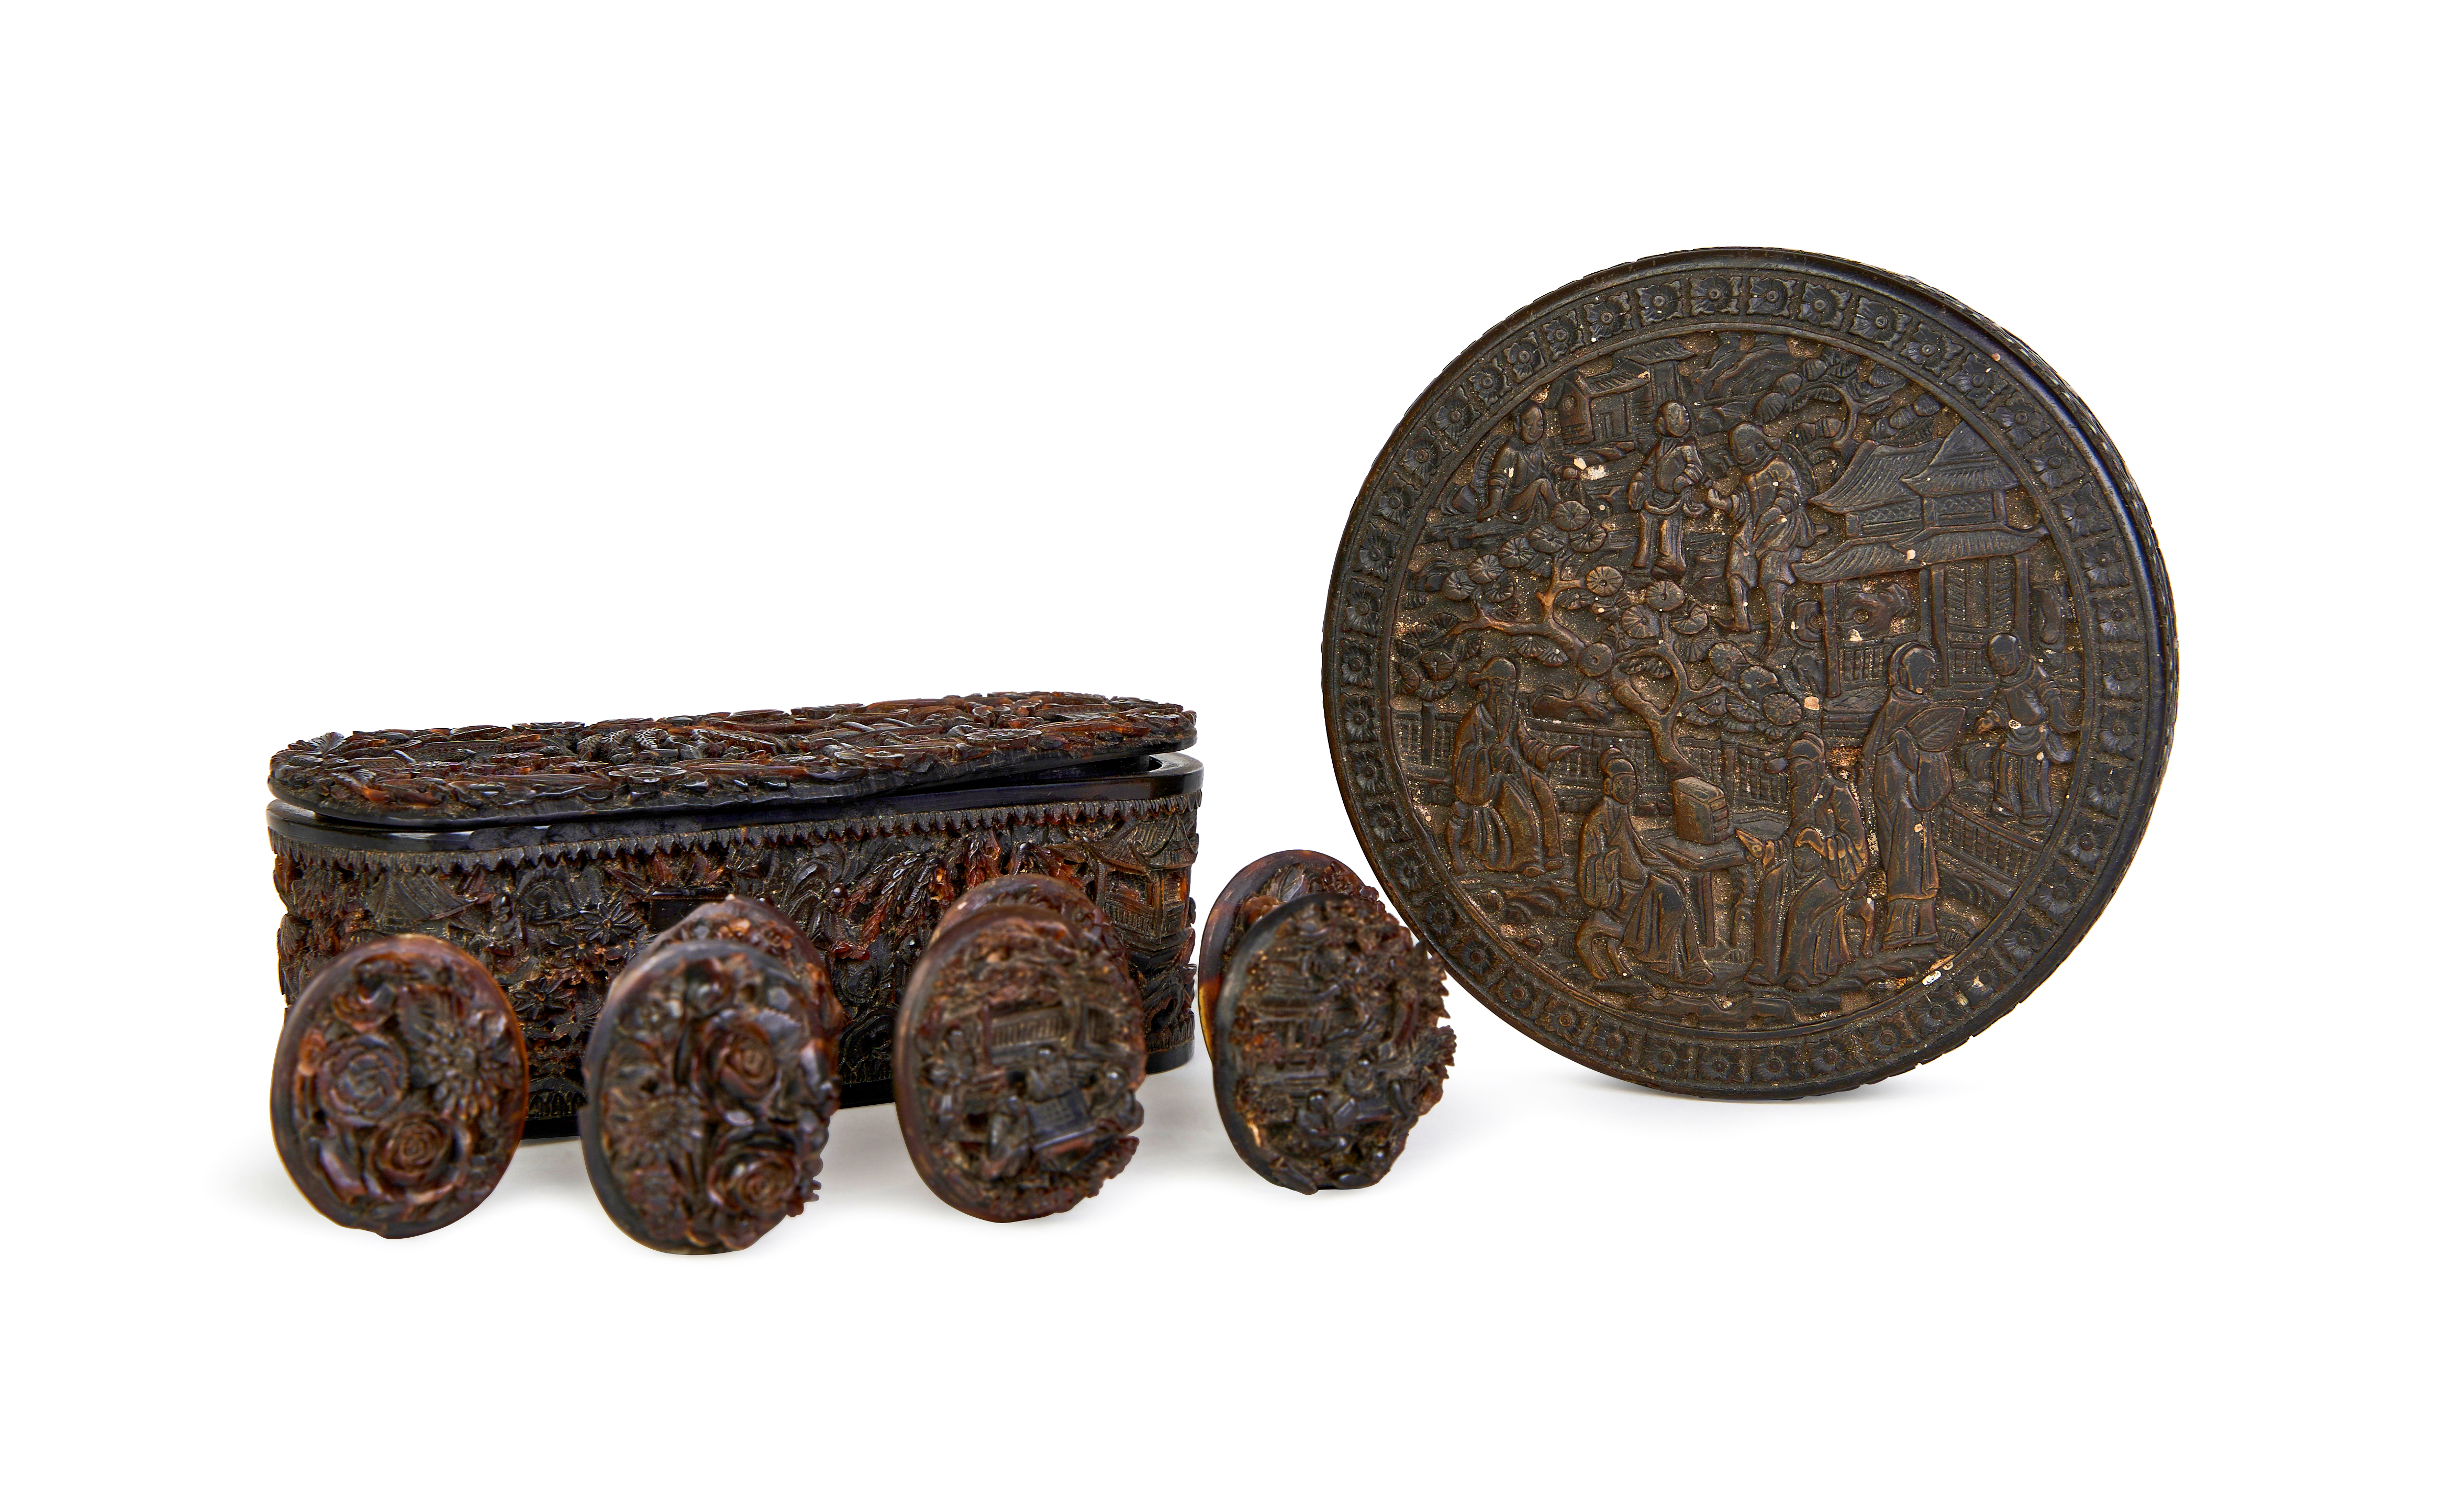 ASSORTMENT OF CARVED CHINESE TORTOISE SHELL BOXES, 18TH CENTURY - Image 3 of 9